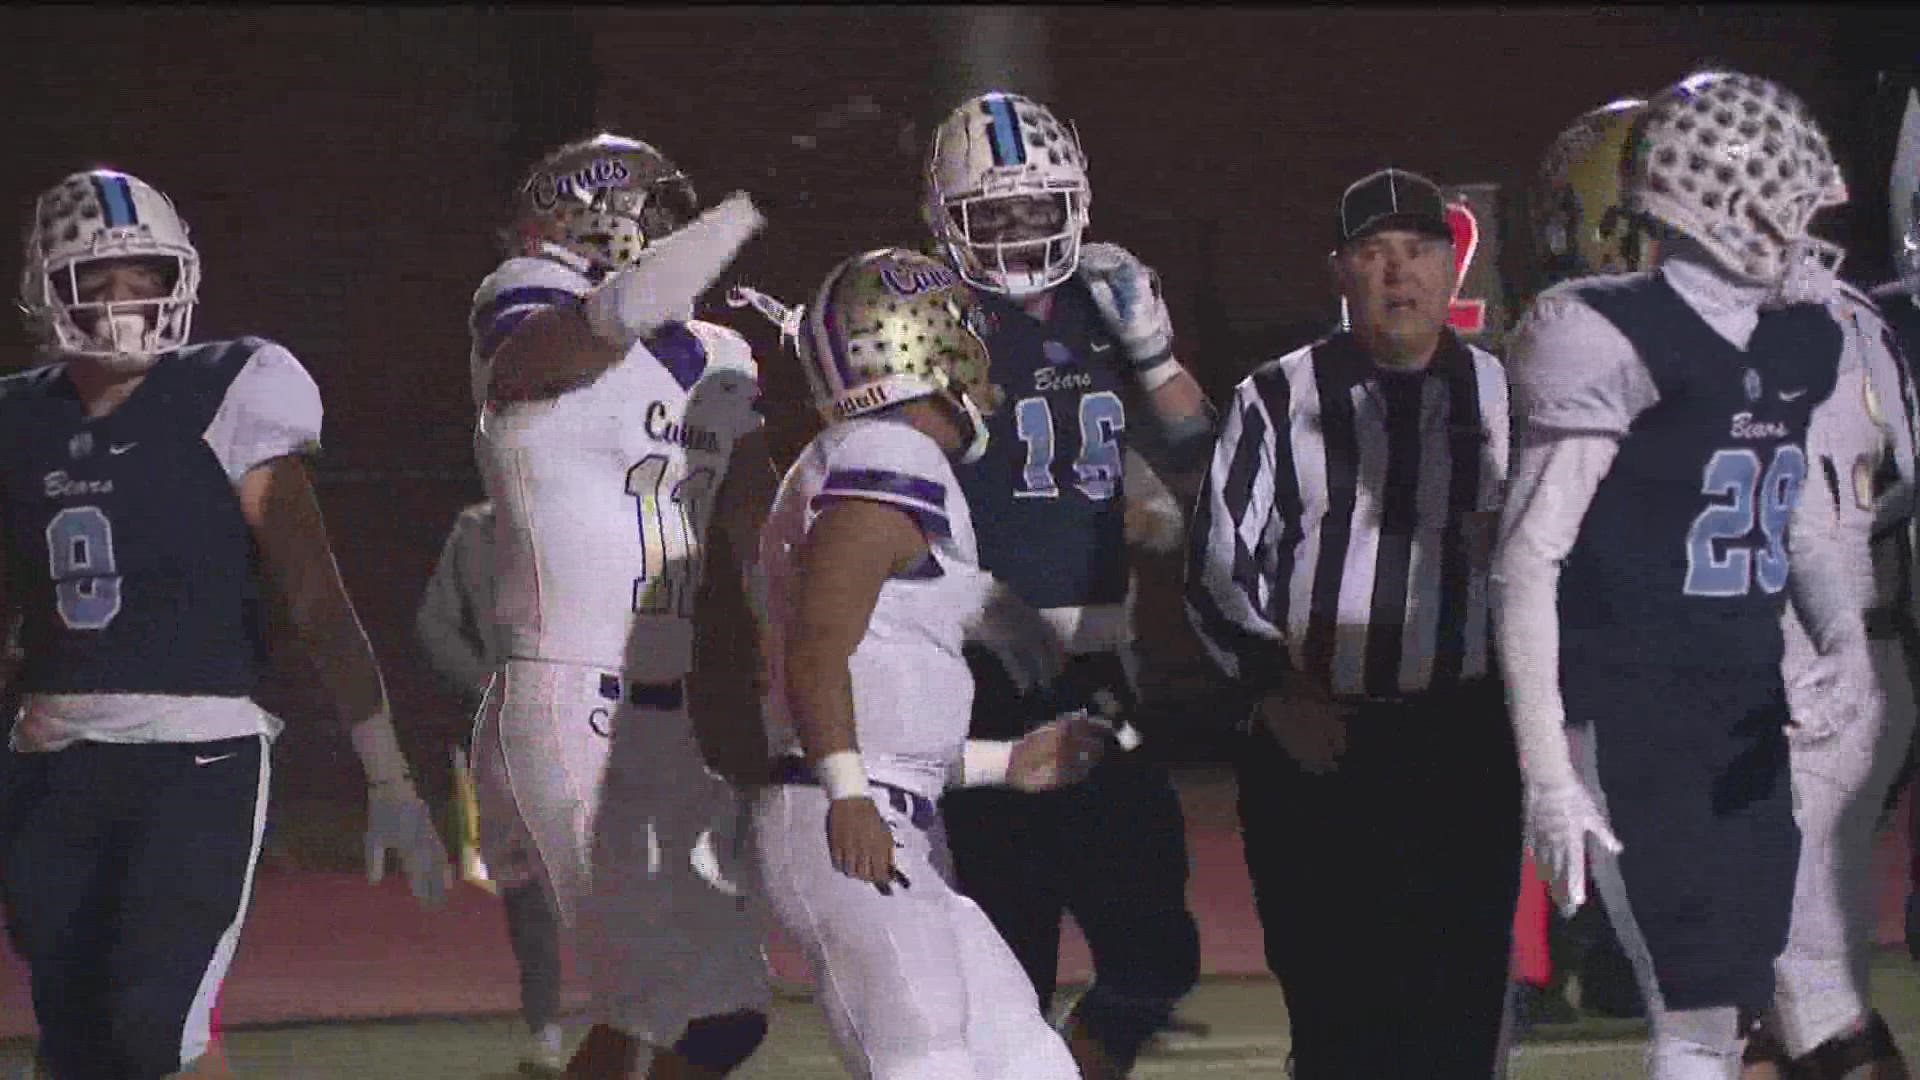 Cartersville cruised to a 37-14 win against Cambridge.